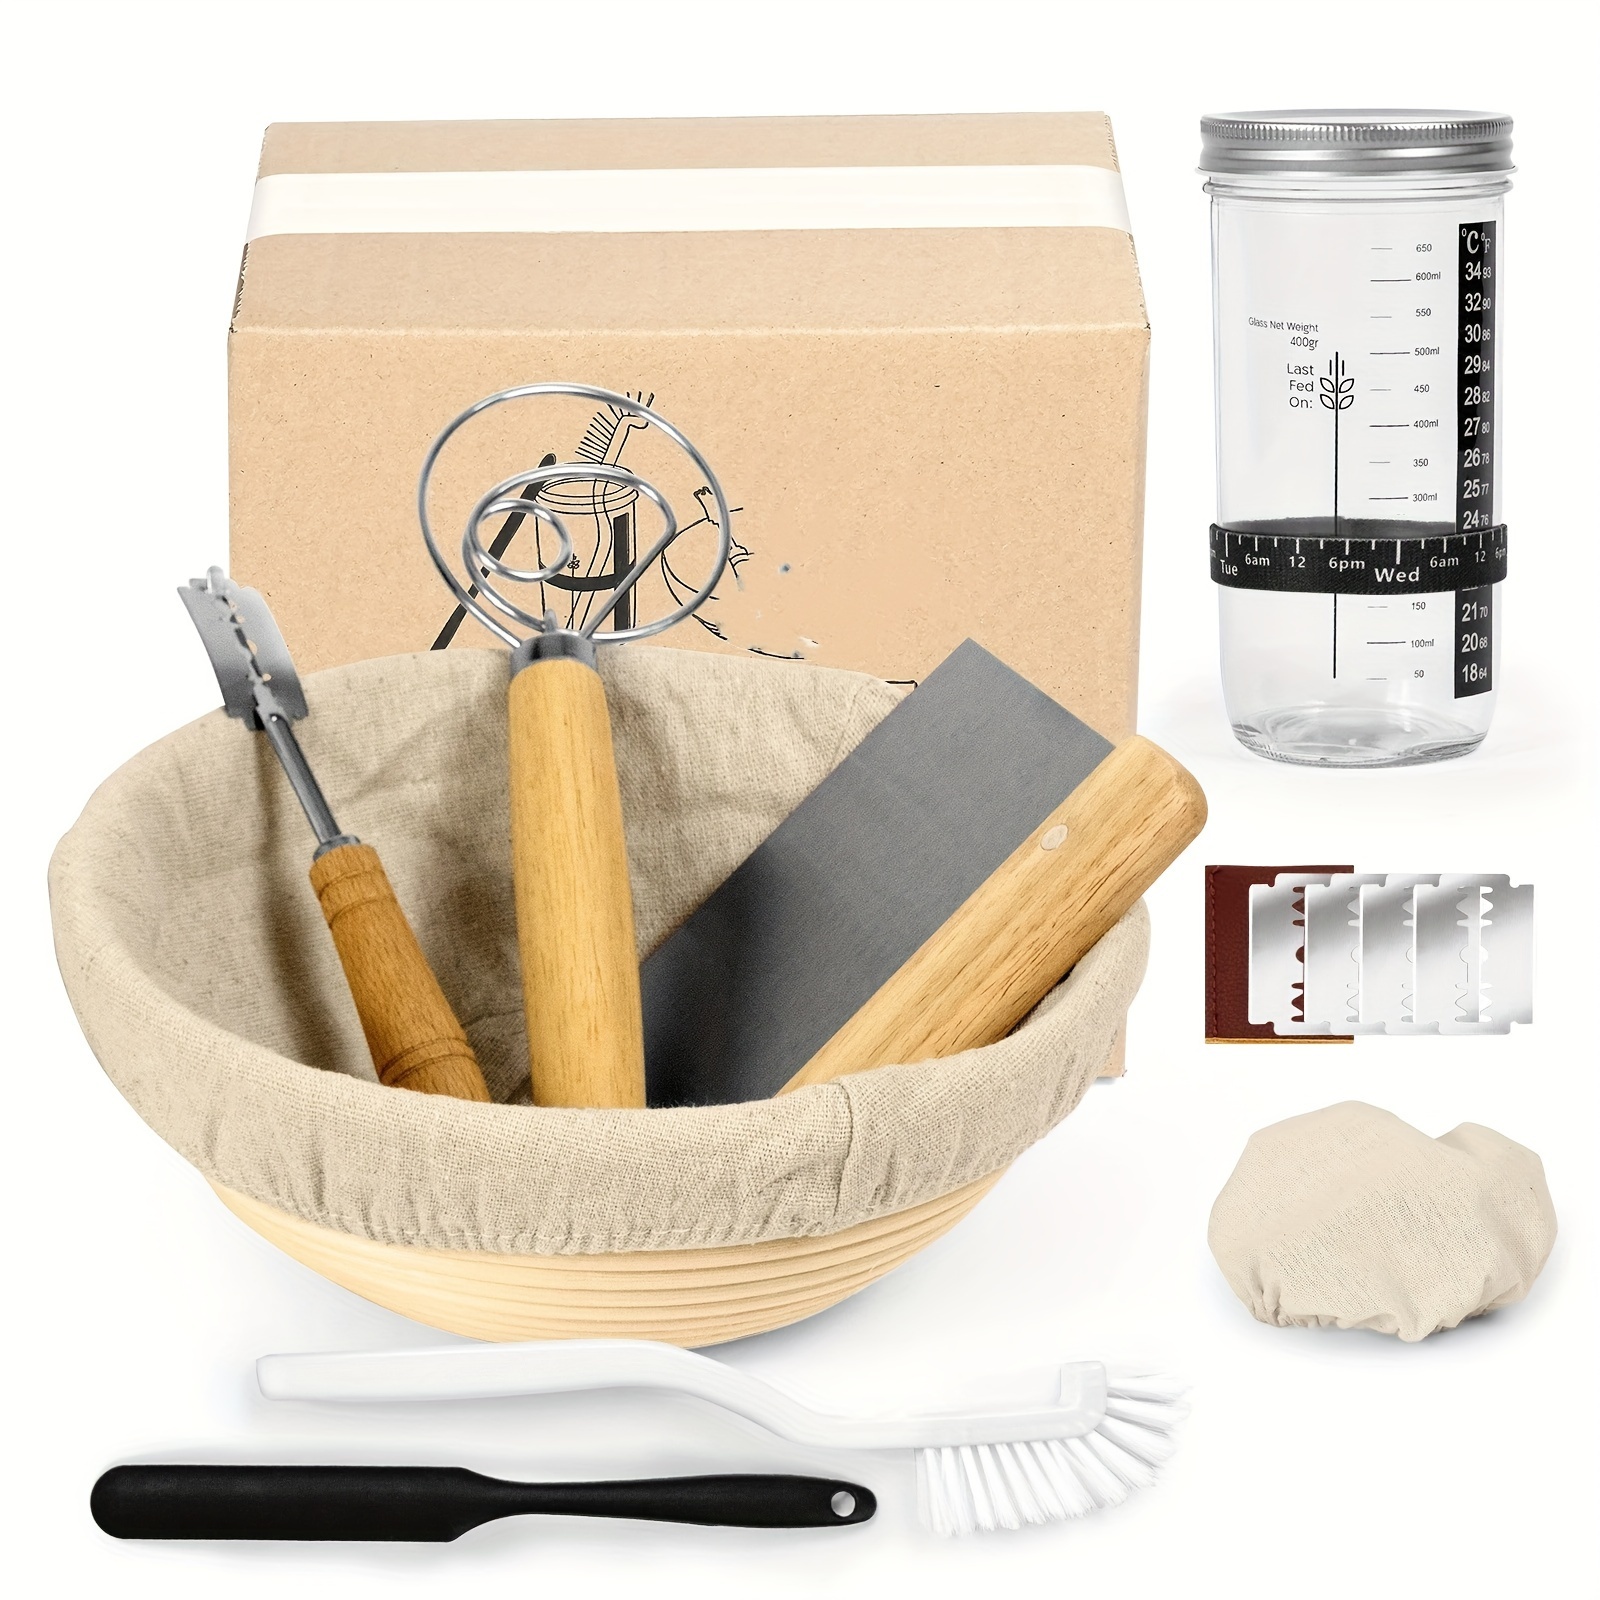 

Set, Sourdough Starter Jar Kit, Bread Proofing Basket And Accessories For Bread Making, Baking Tools, Home Kitchen Accessories